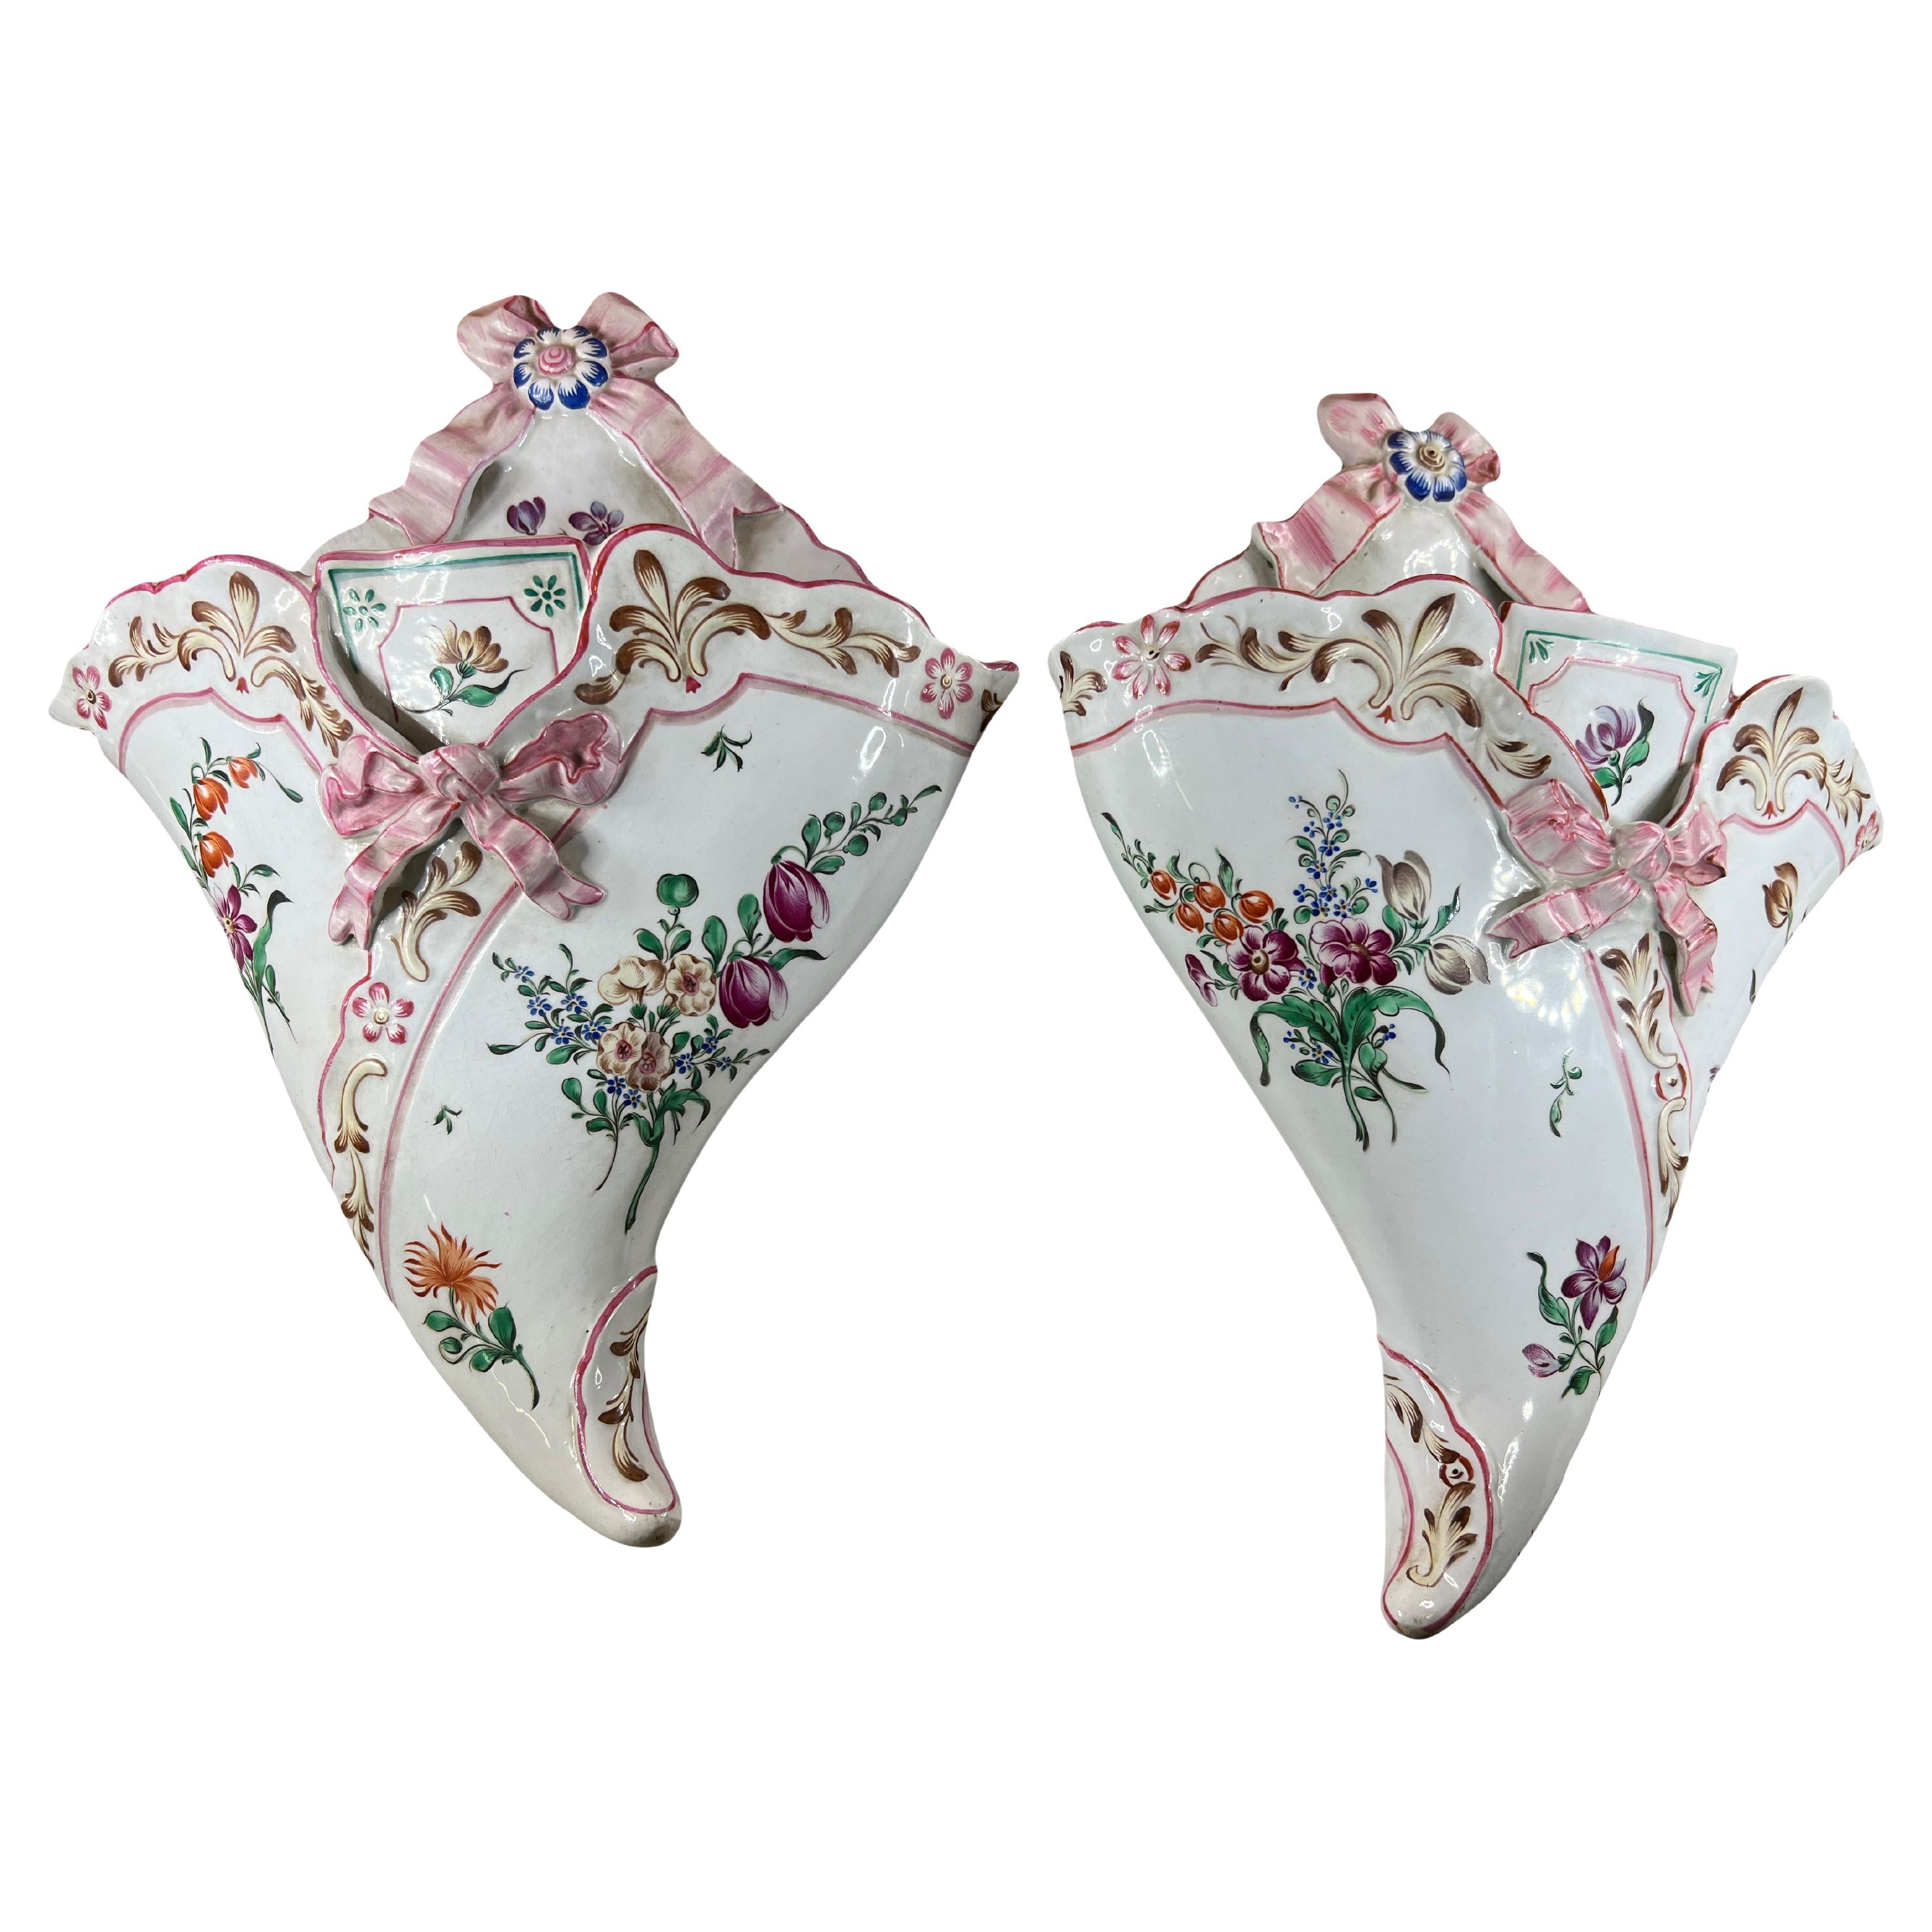 Pair of Luneville Faience Wall Décor Vases from 1900 For Sale